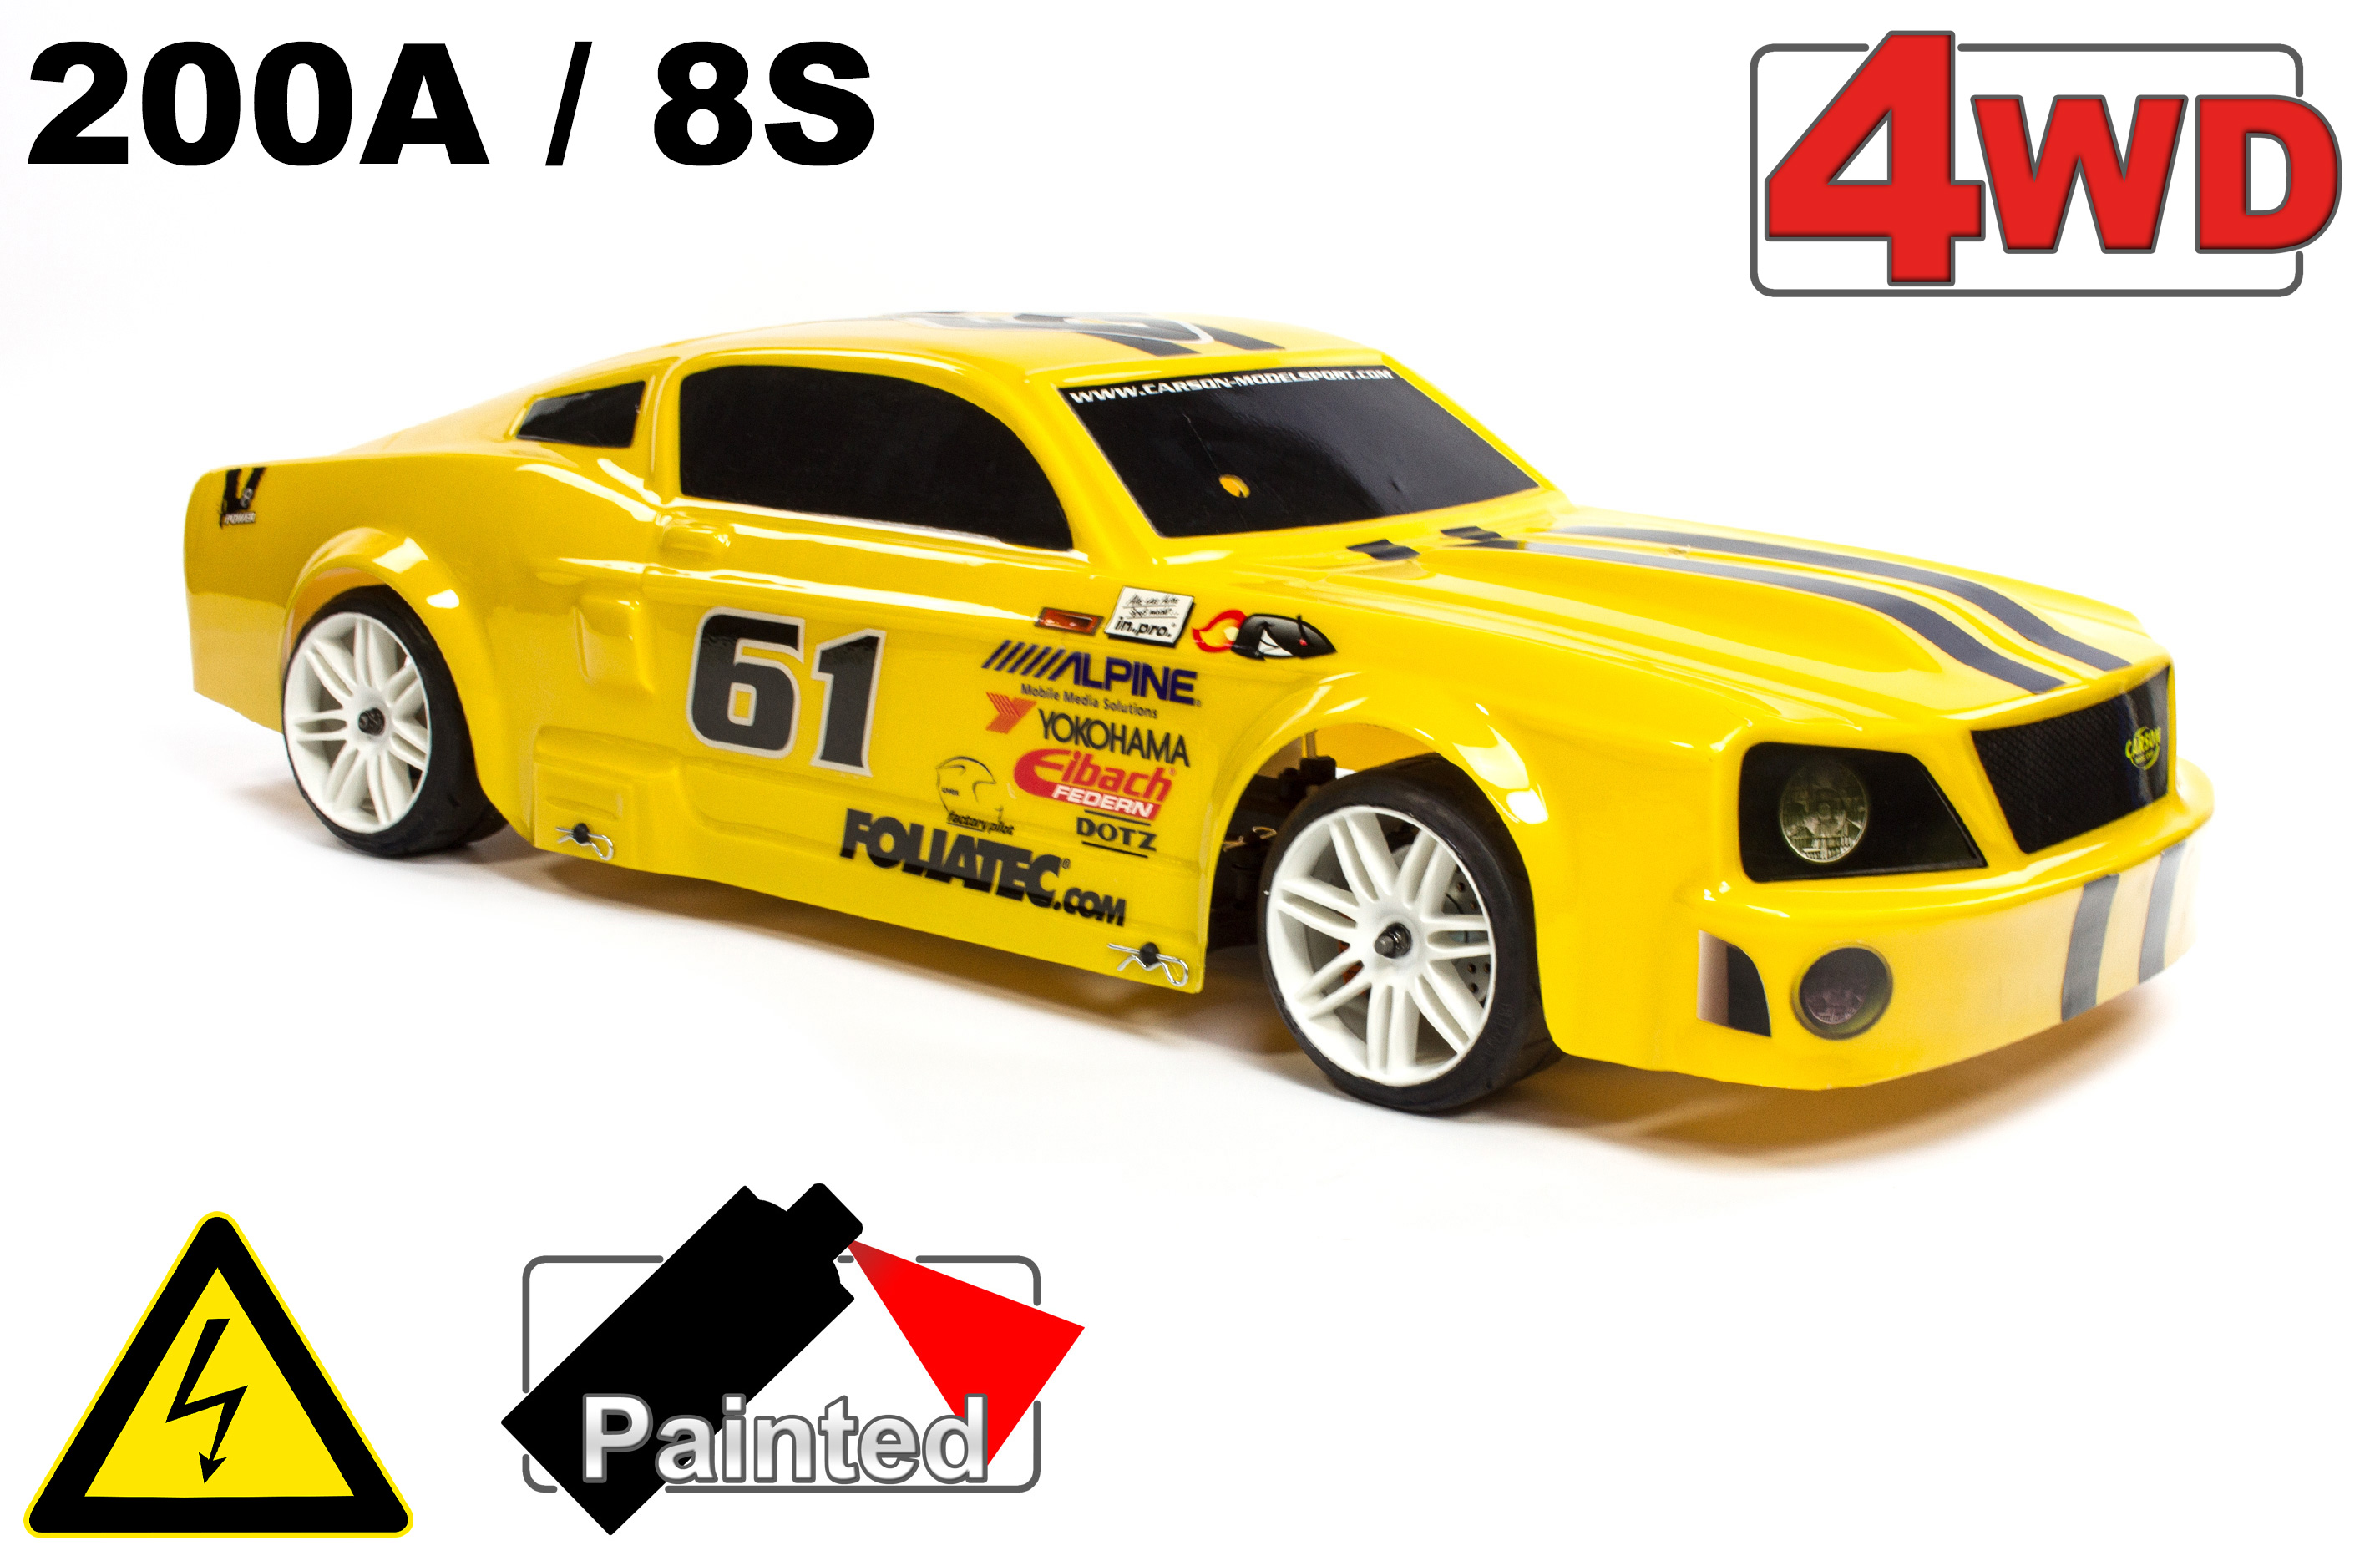 FG Sportsline 4WD-530 Electro painted Ford Mustang